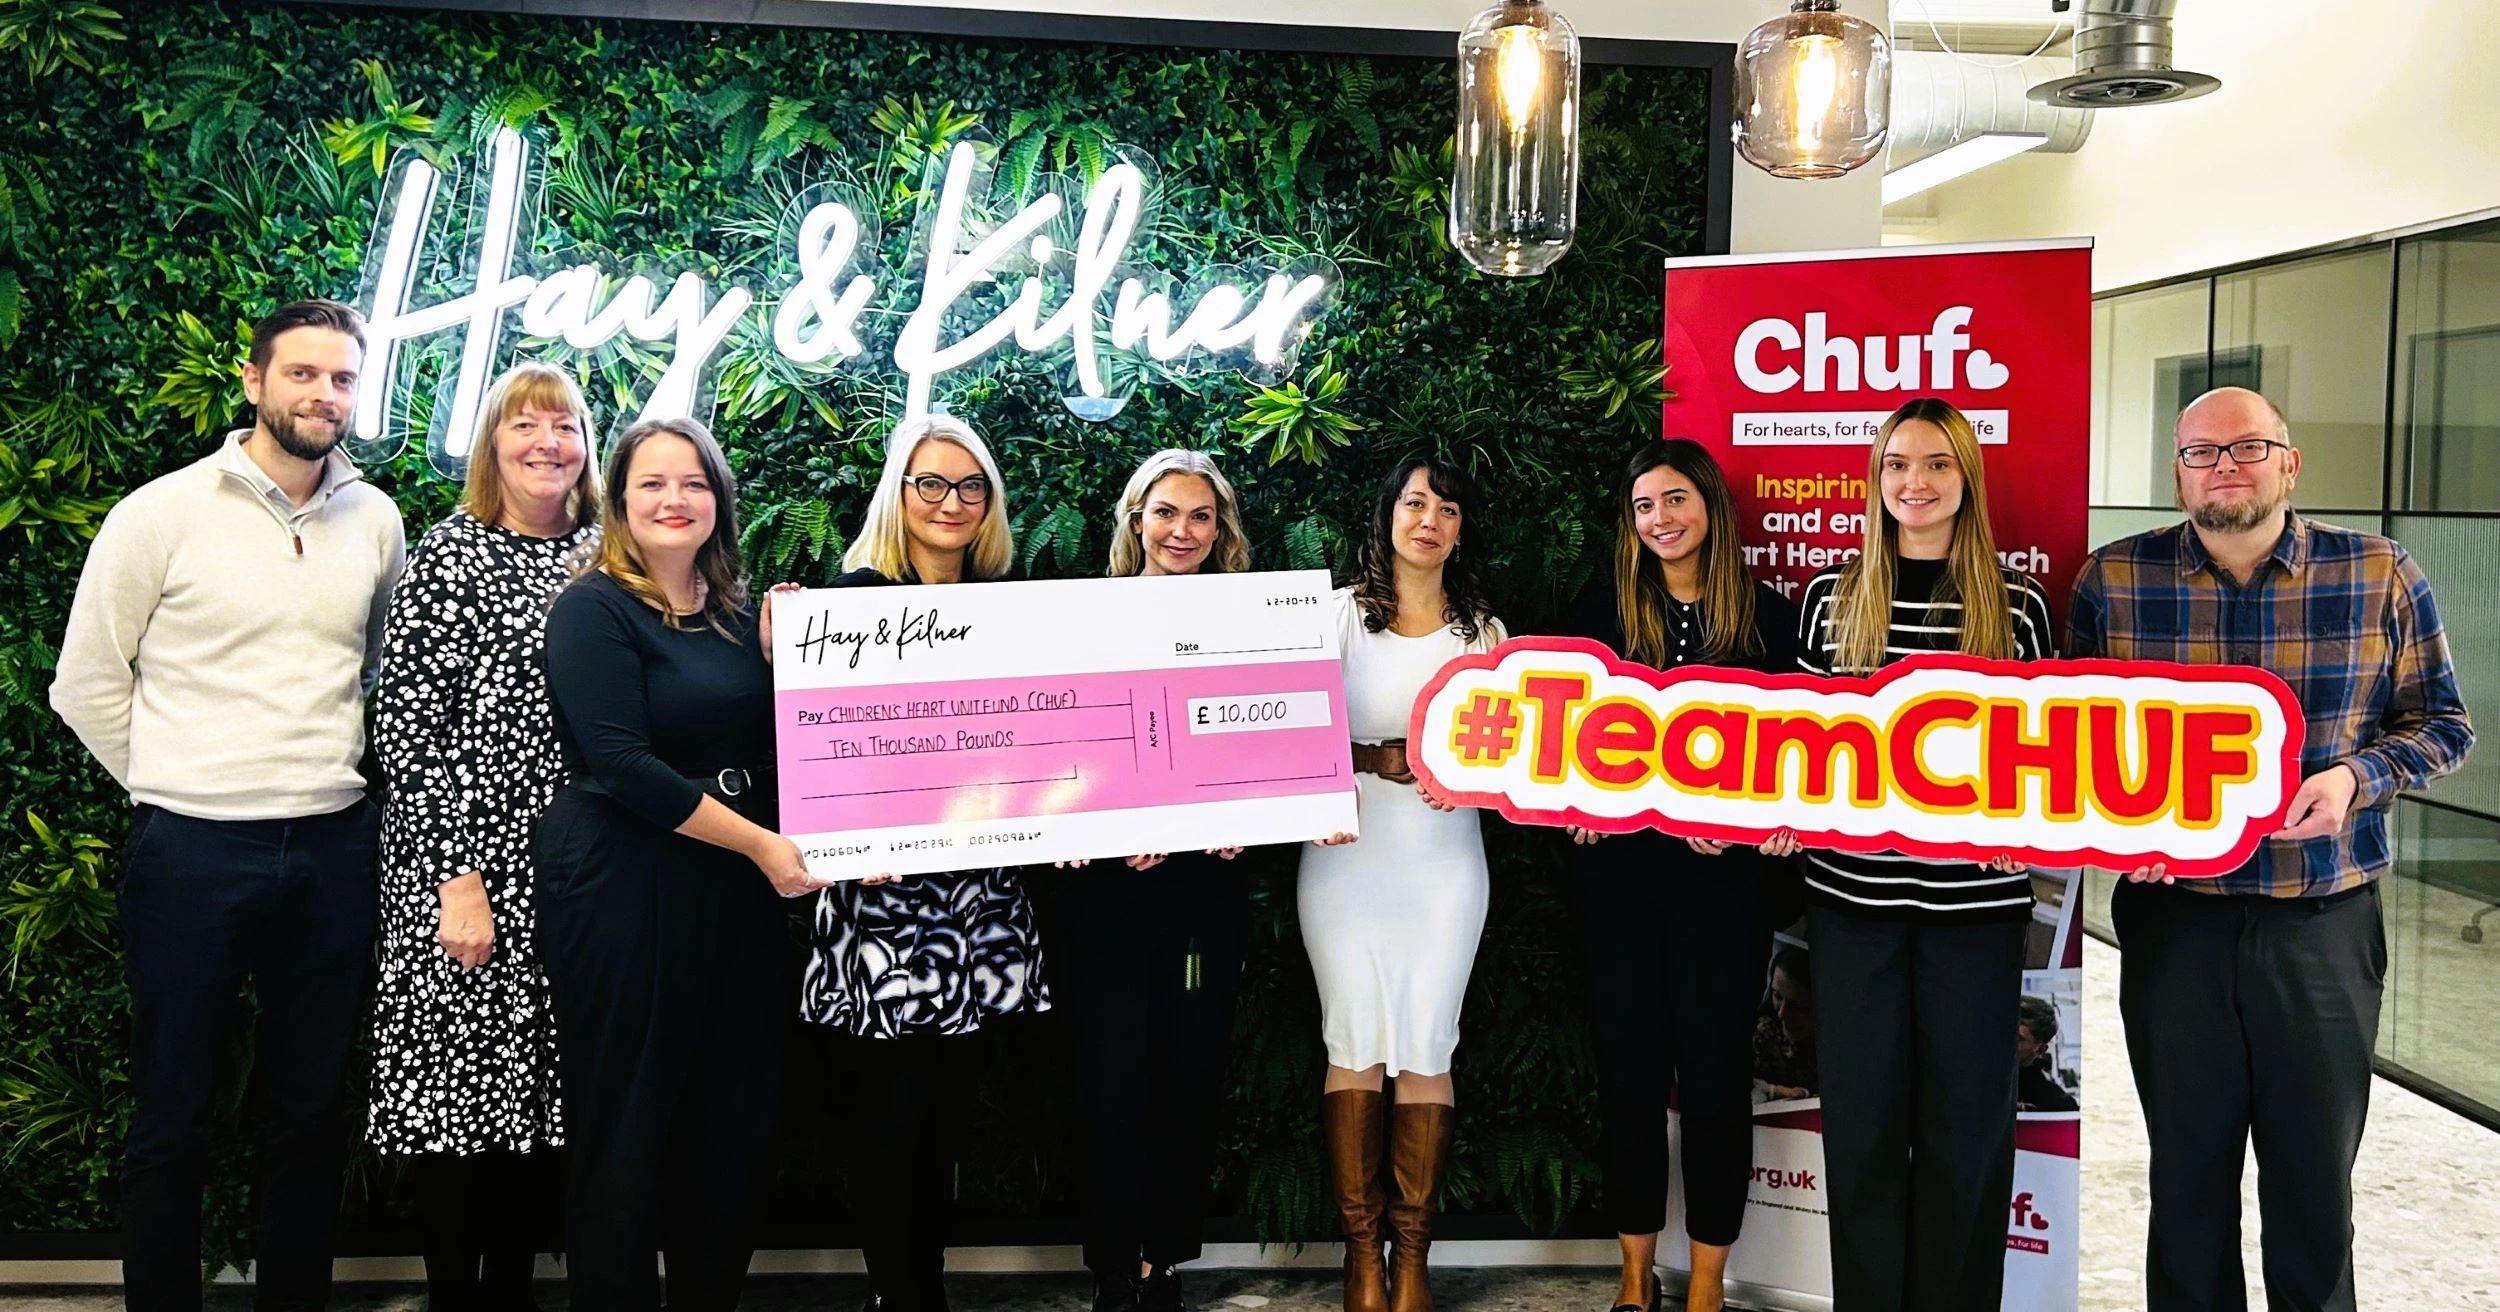 Members of the Hay & Kilner team presenting a cheque for £10,000 to (centre, white dress) Alicia Clovis-Mothalib, corporate & trusts fundraising manager at Chuf